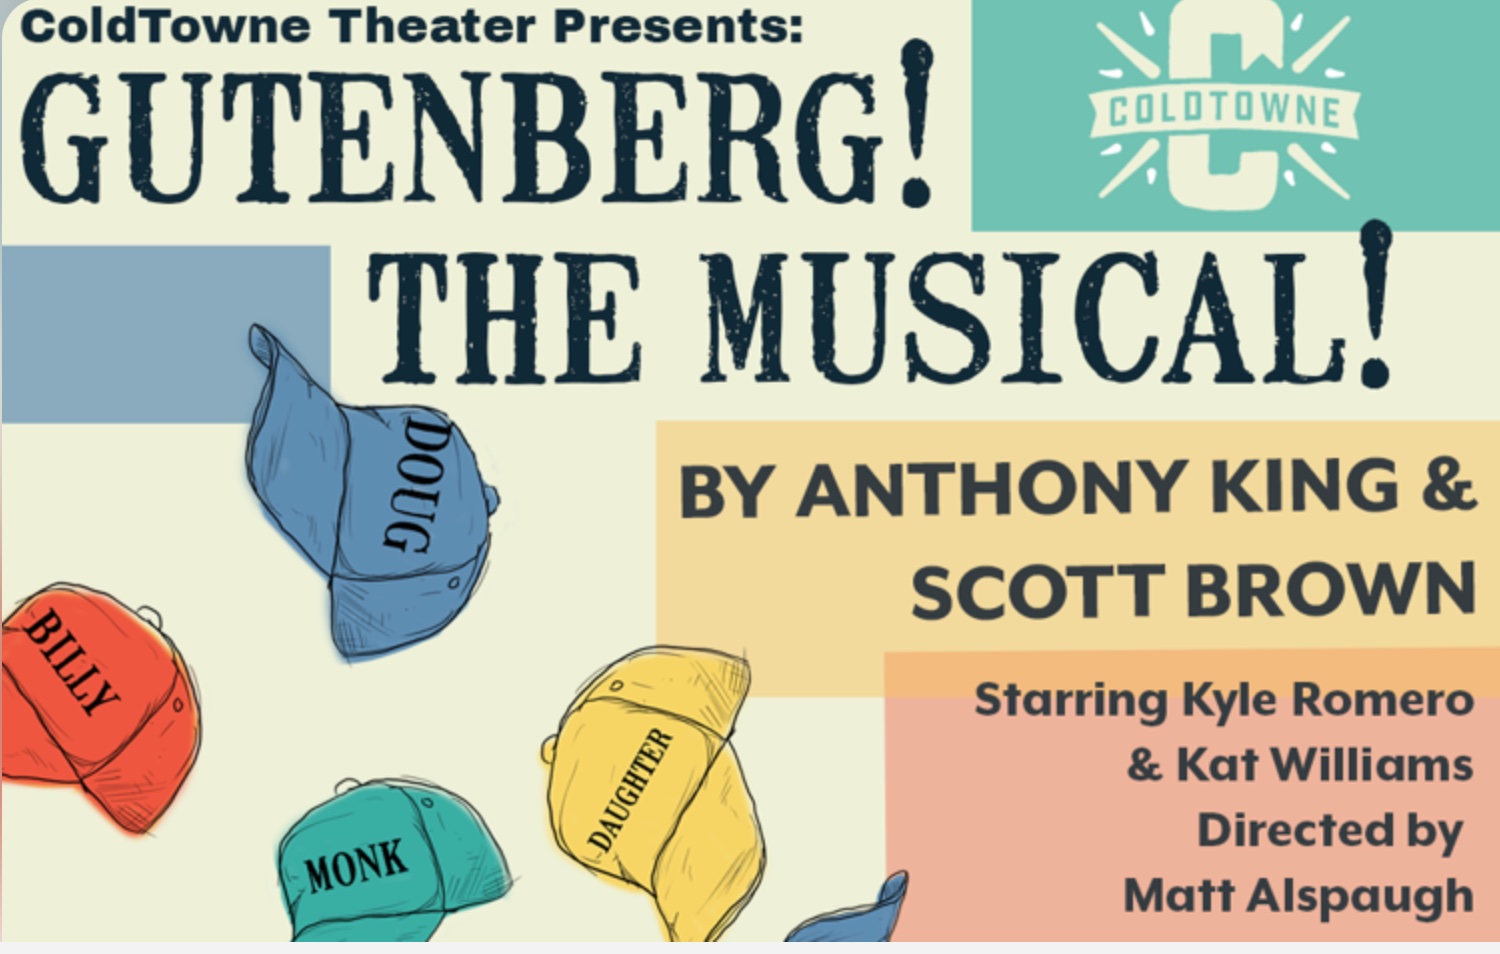 Gutenberg! The musical! by Coldtowne Theatre